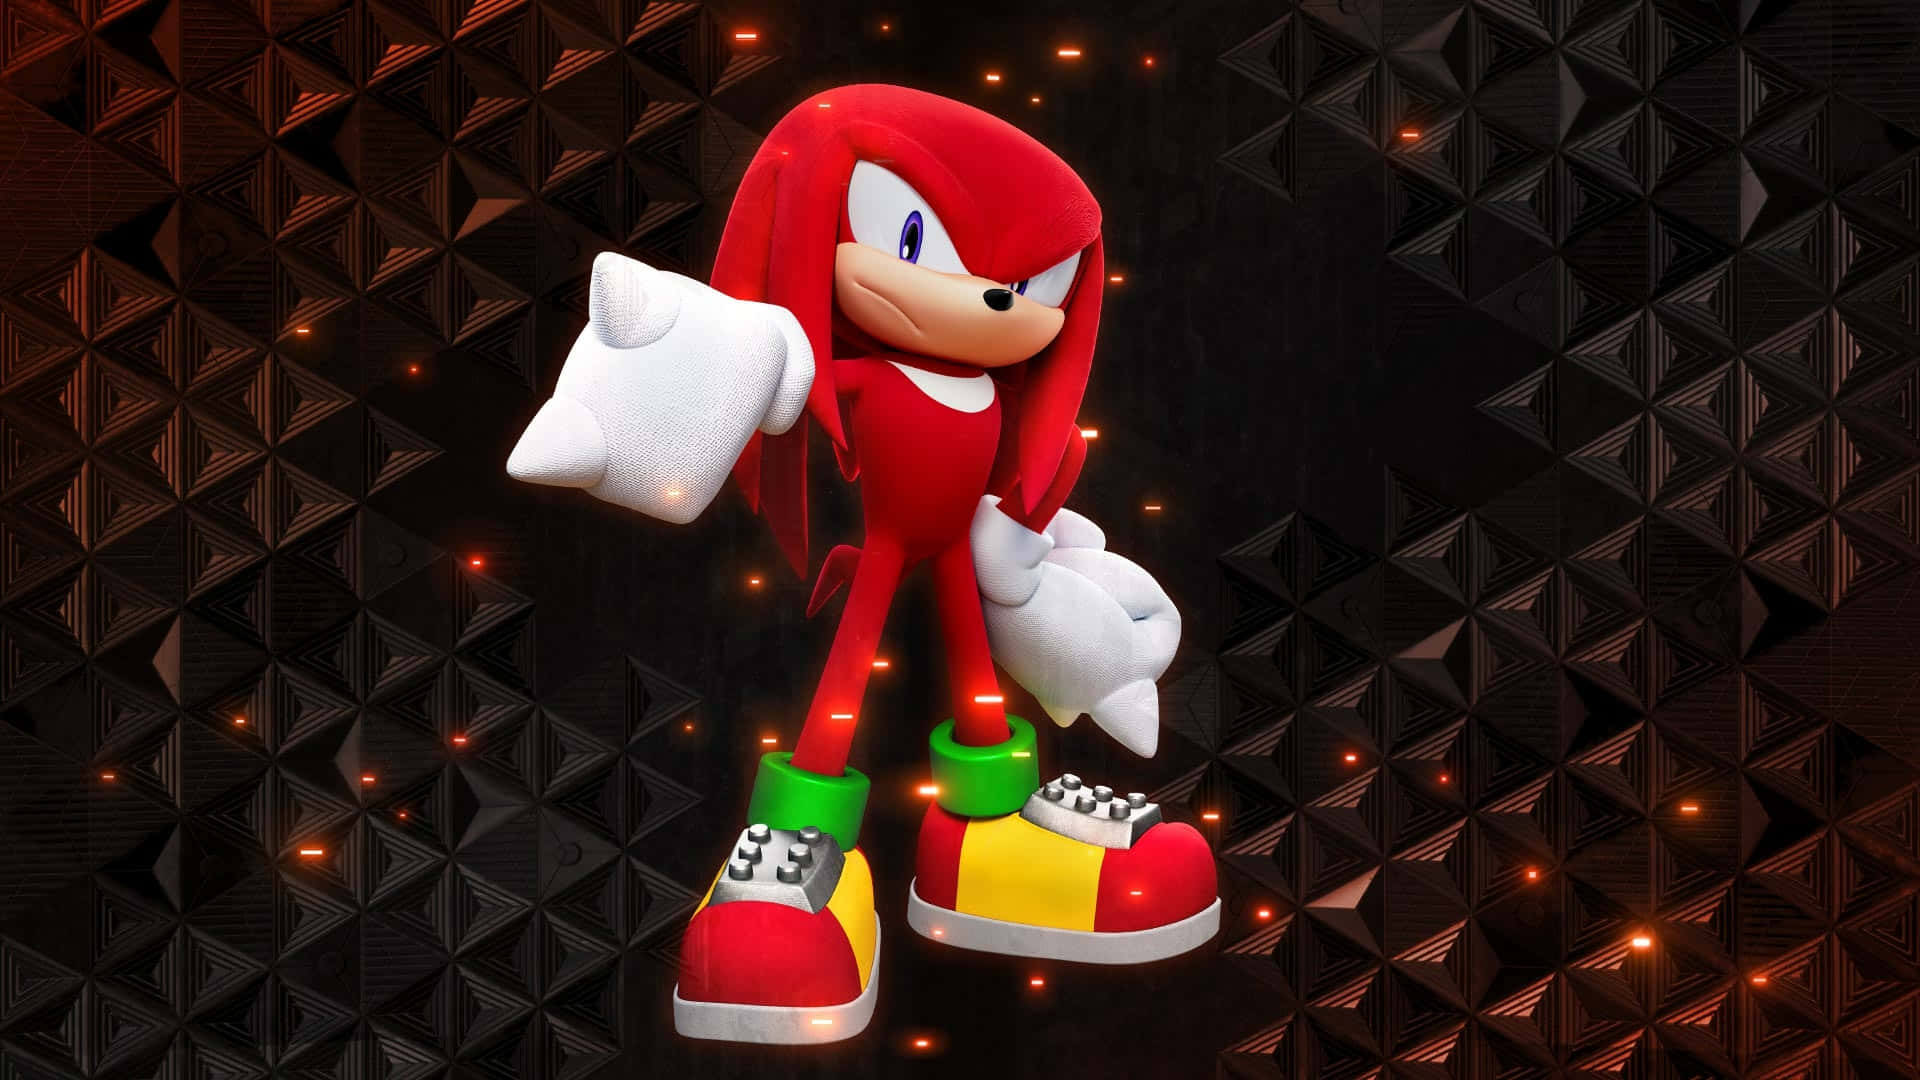 'knuckles The Echidna From The Sonic The Hedgehog Franchise' Background